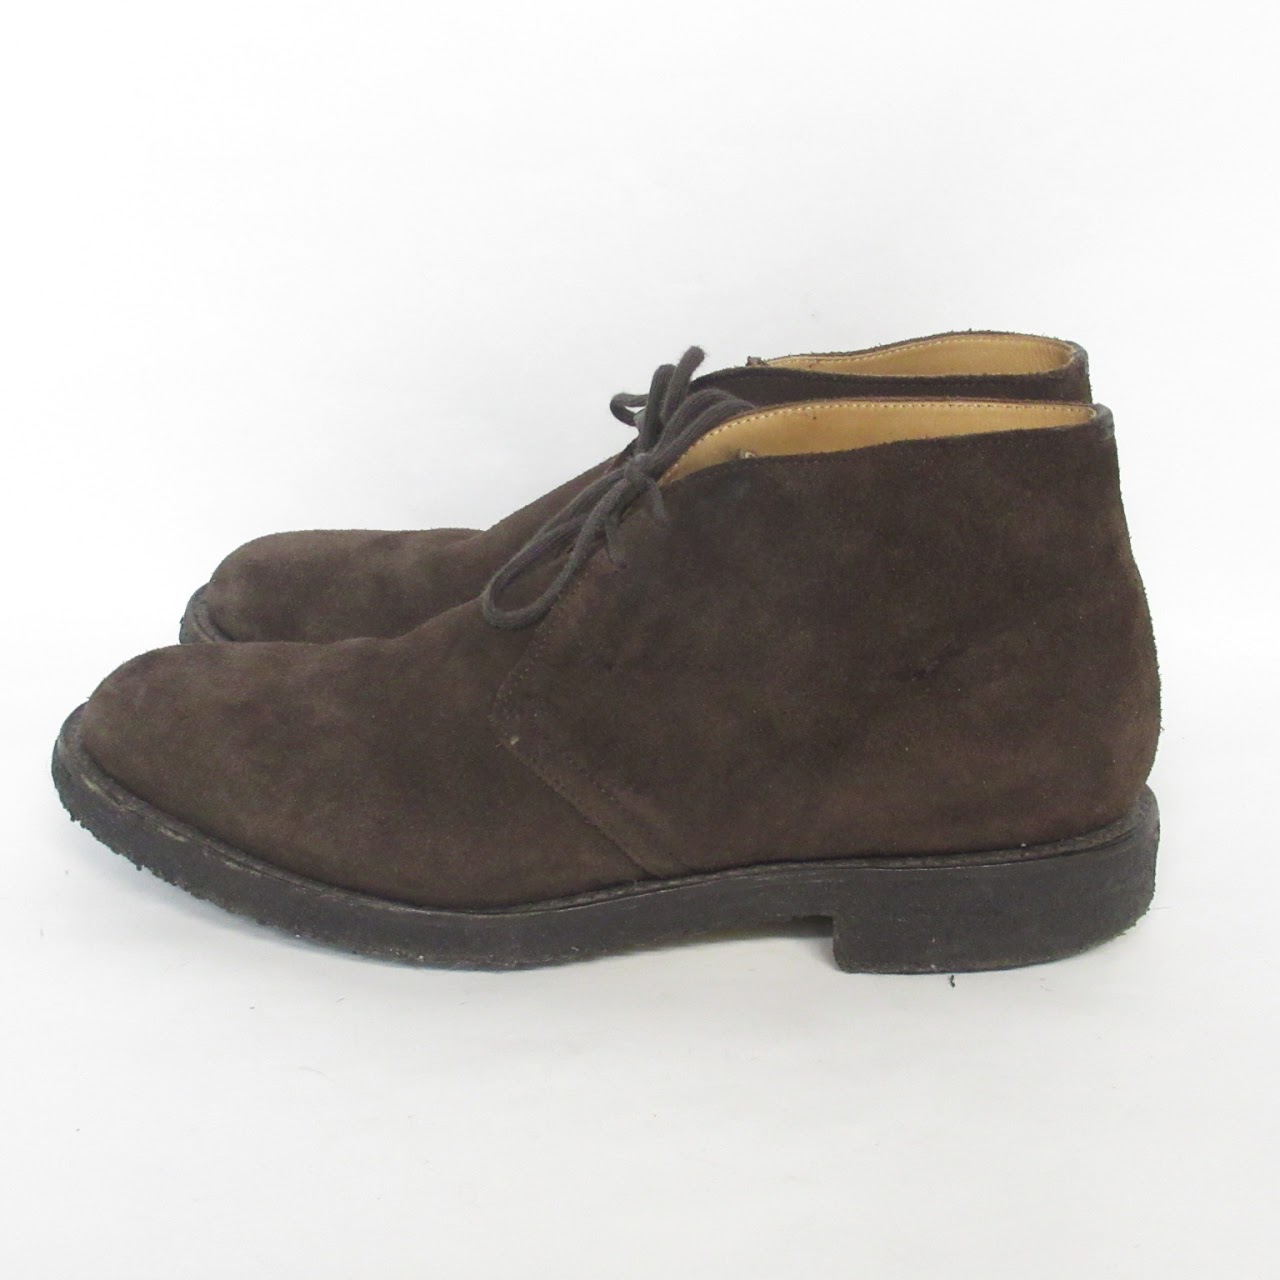 Church's Suede Leather Chukka Boots